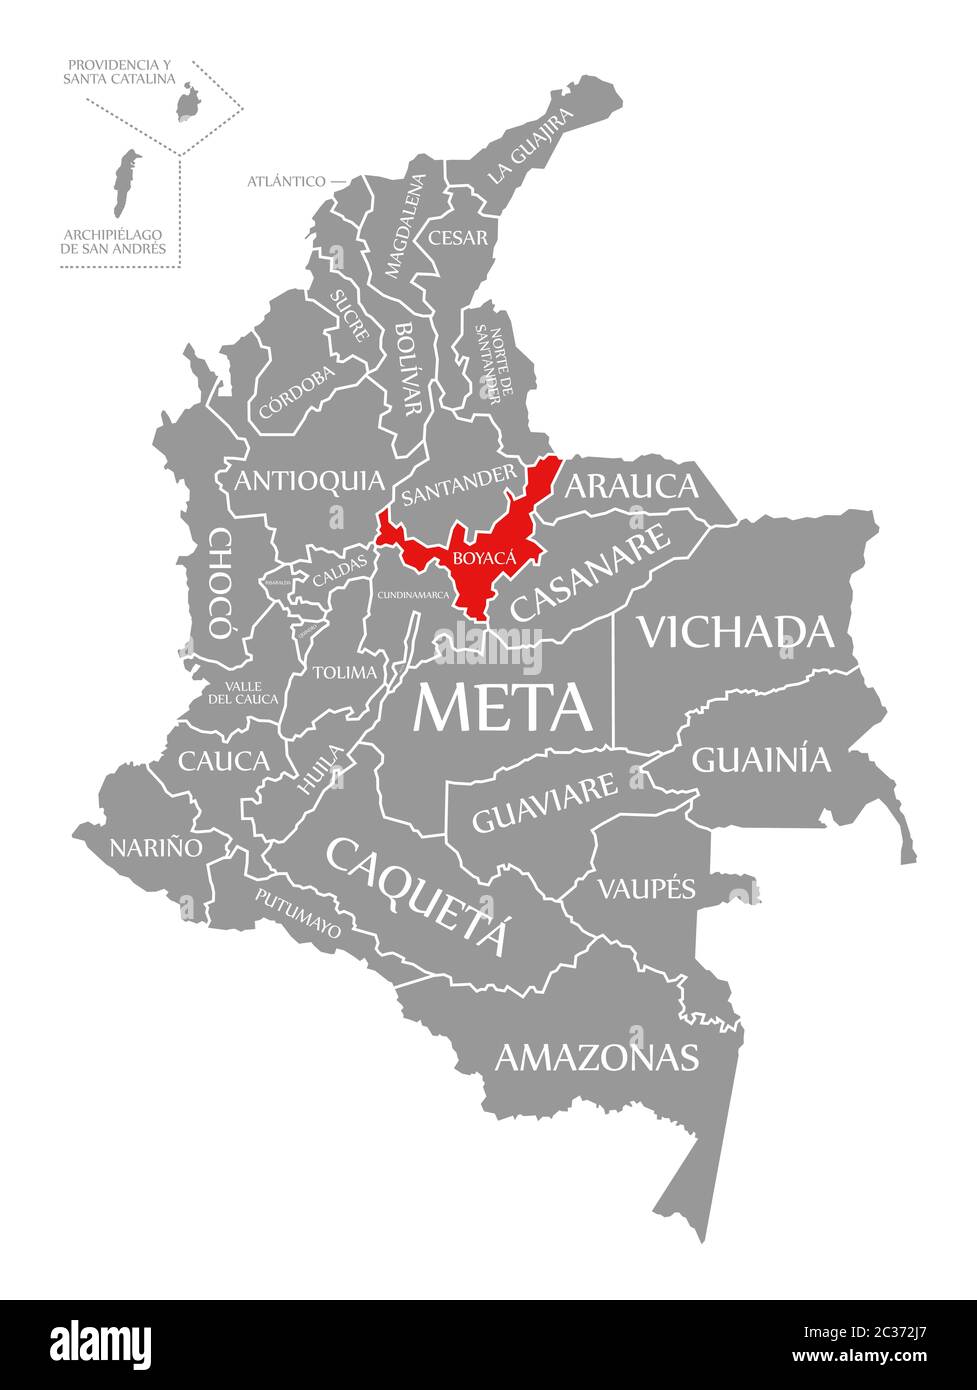 Boyaca red highlighted in map of Colombia Stock Photo